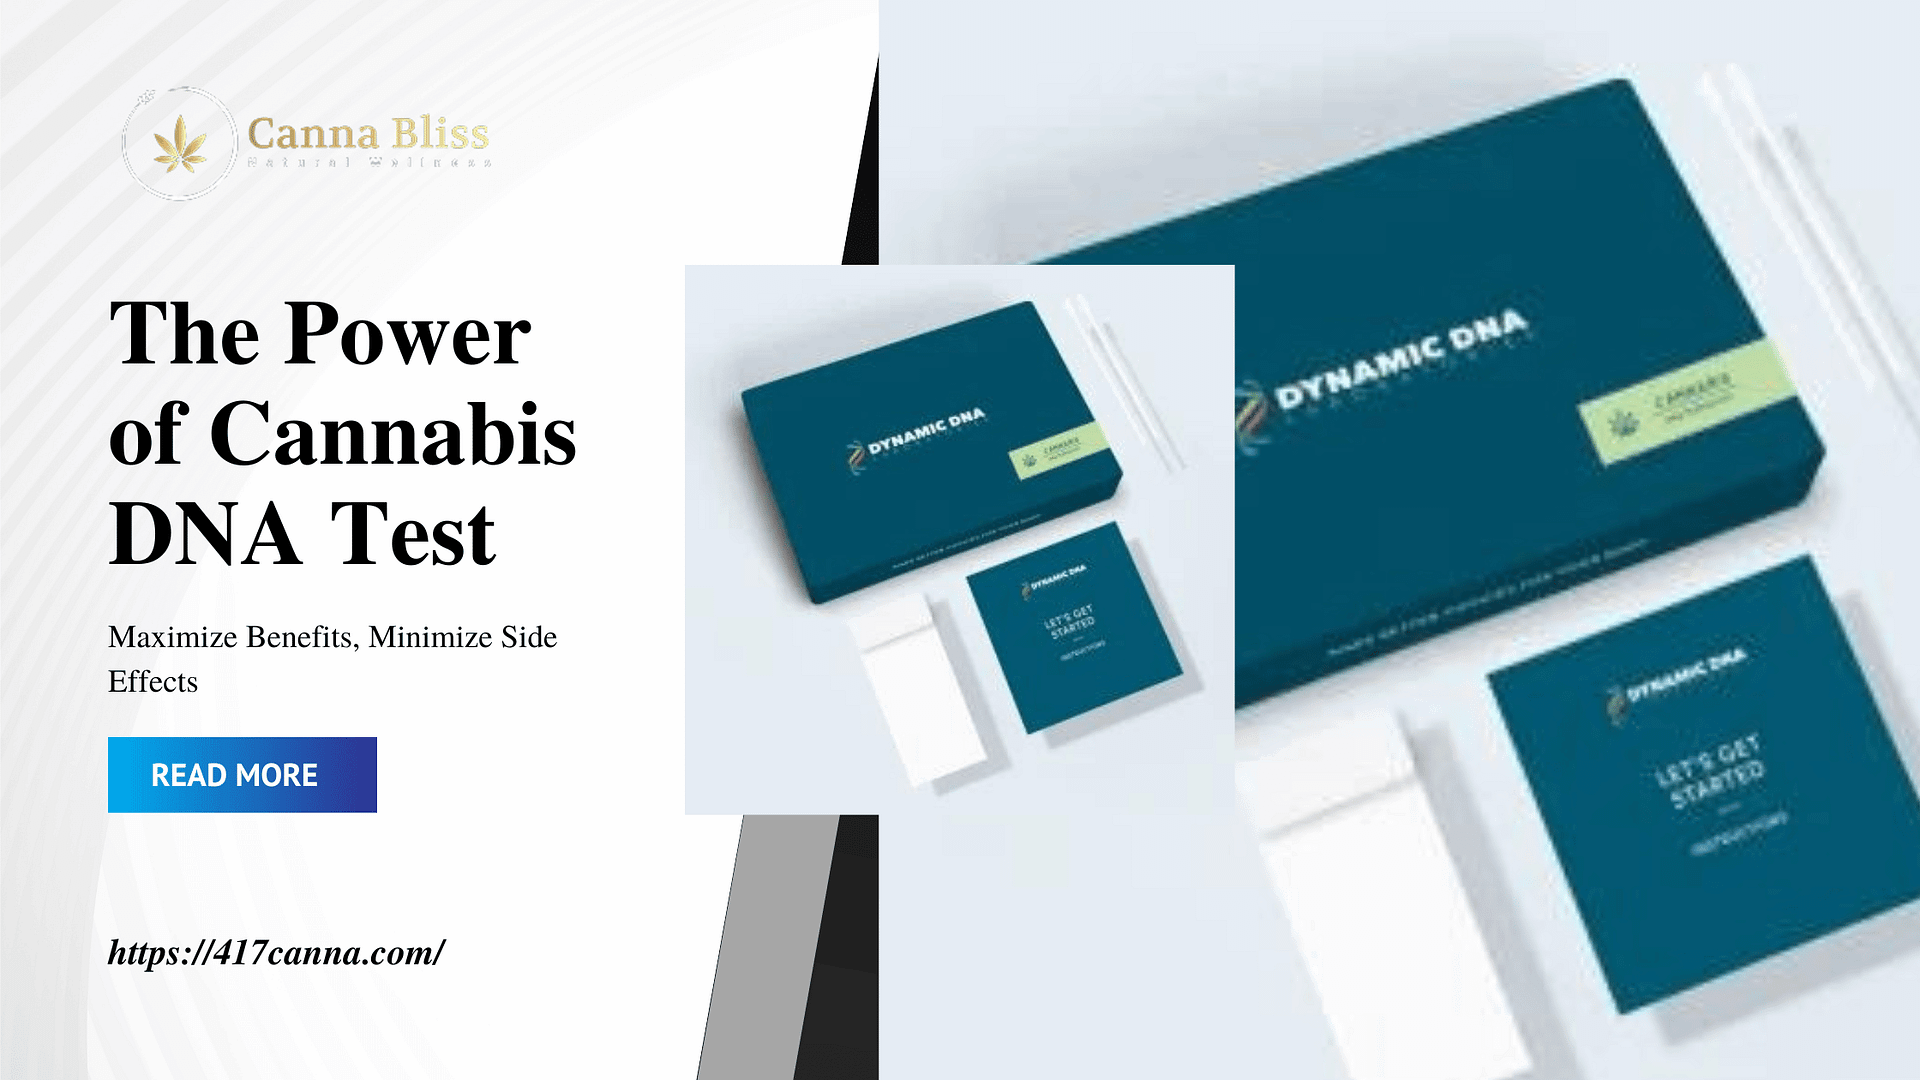 The Power of Cannabis DNA Test